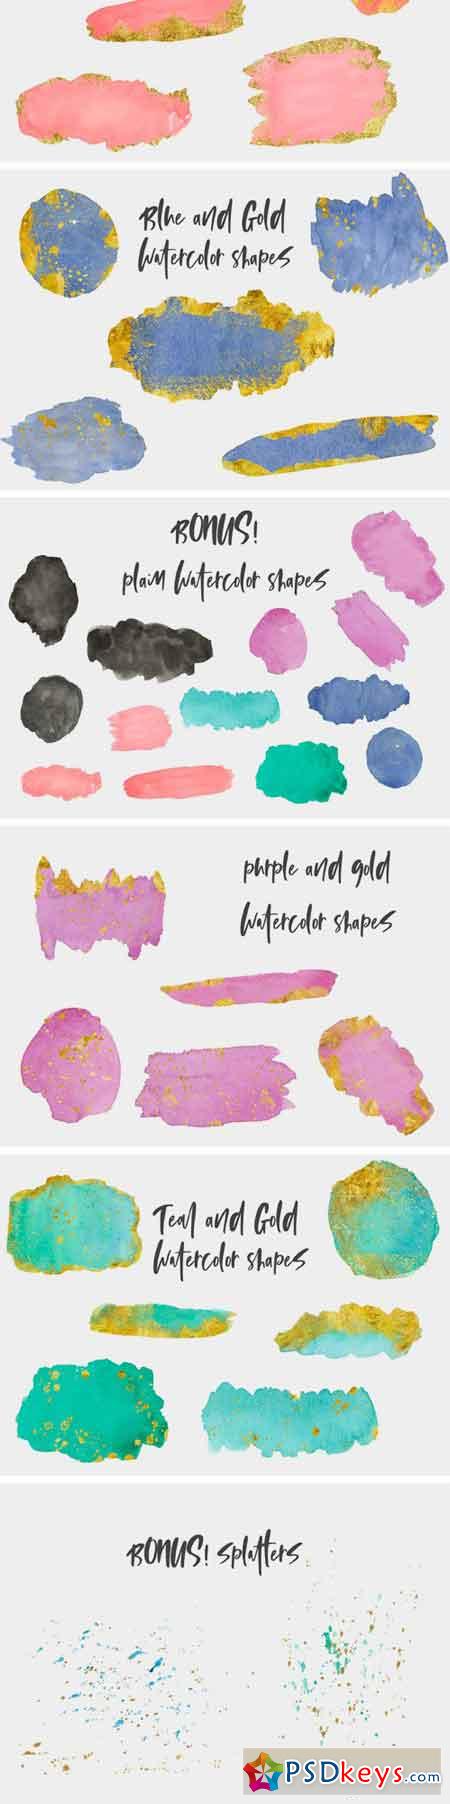 Watercolor and Gold Texture Pack 2392949